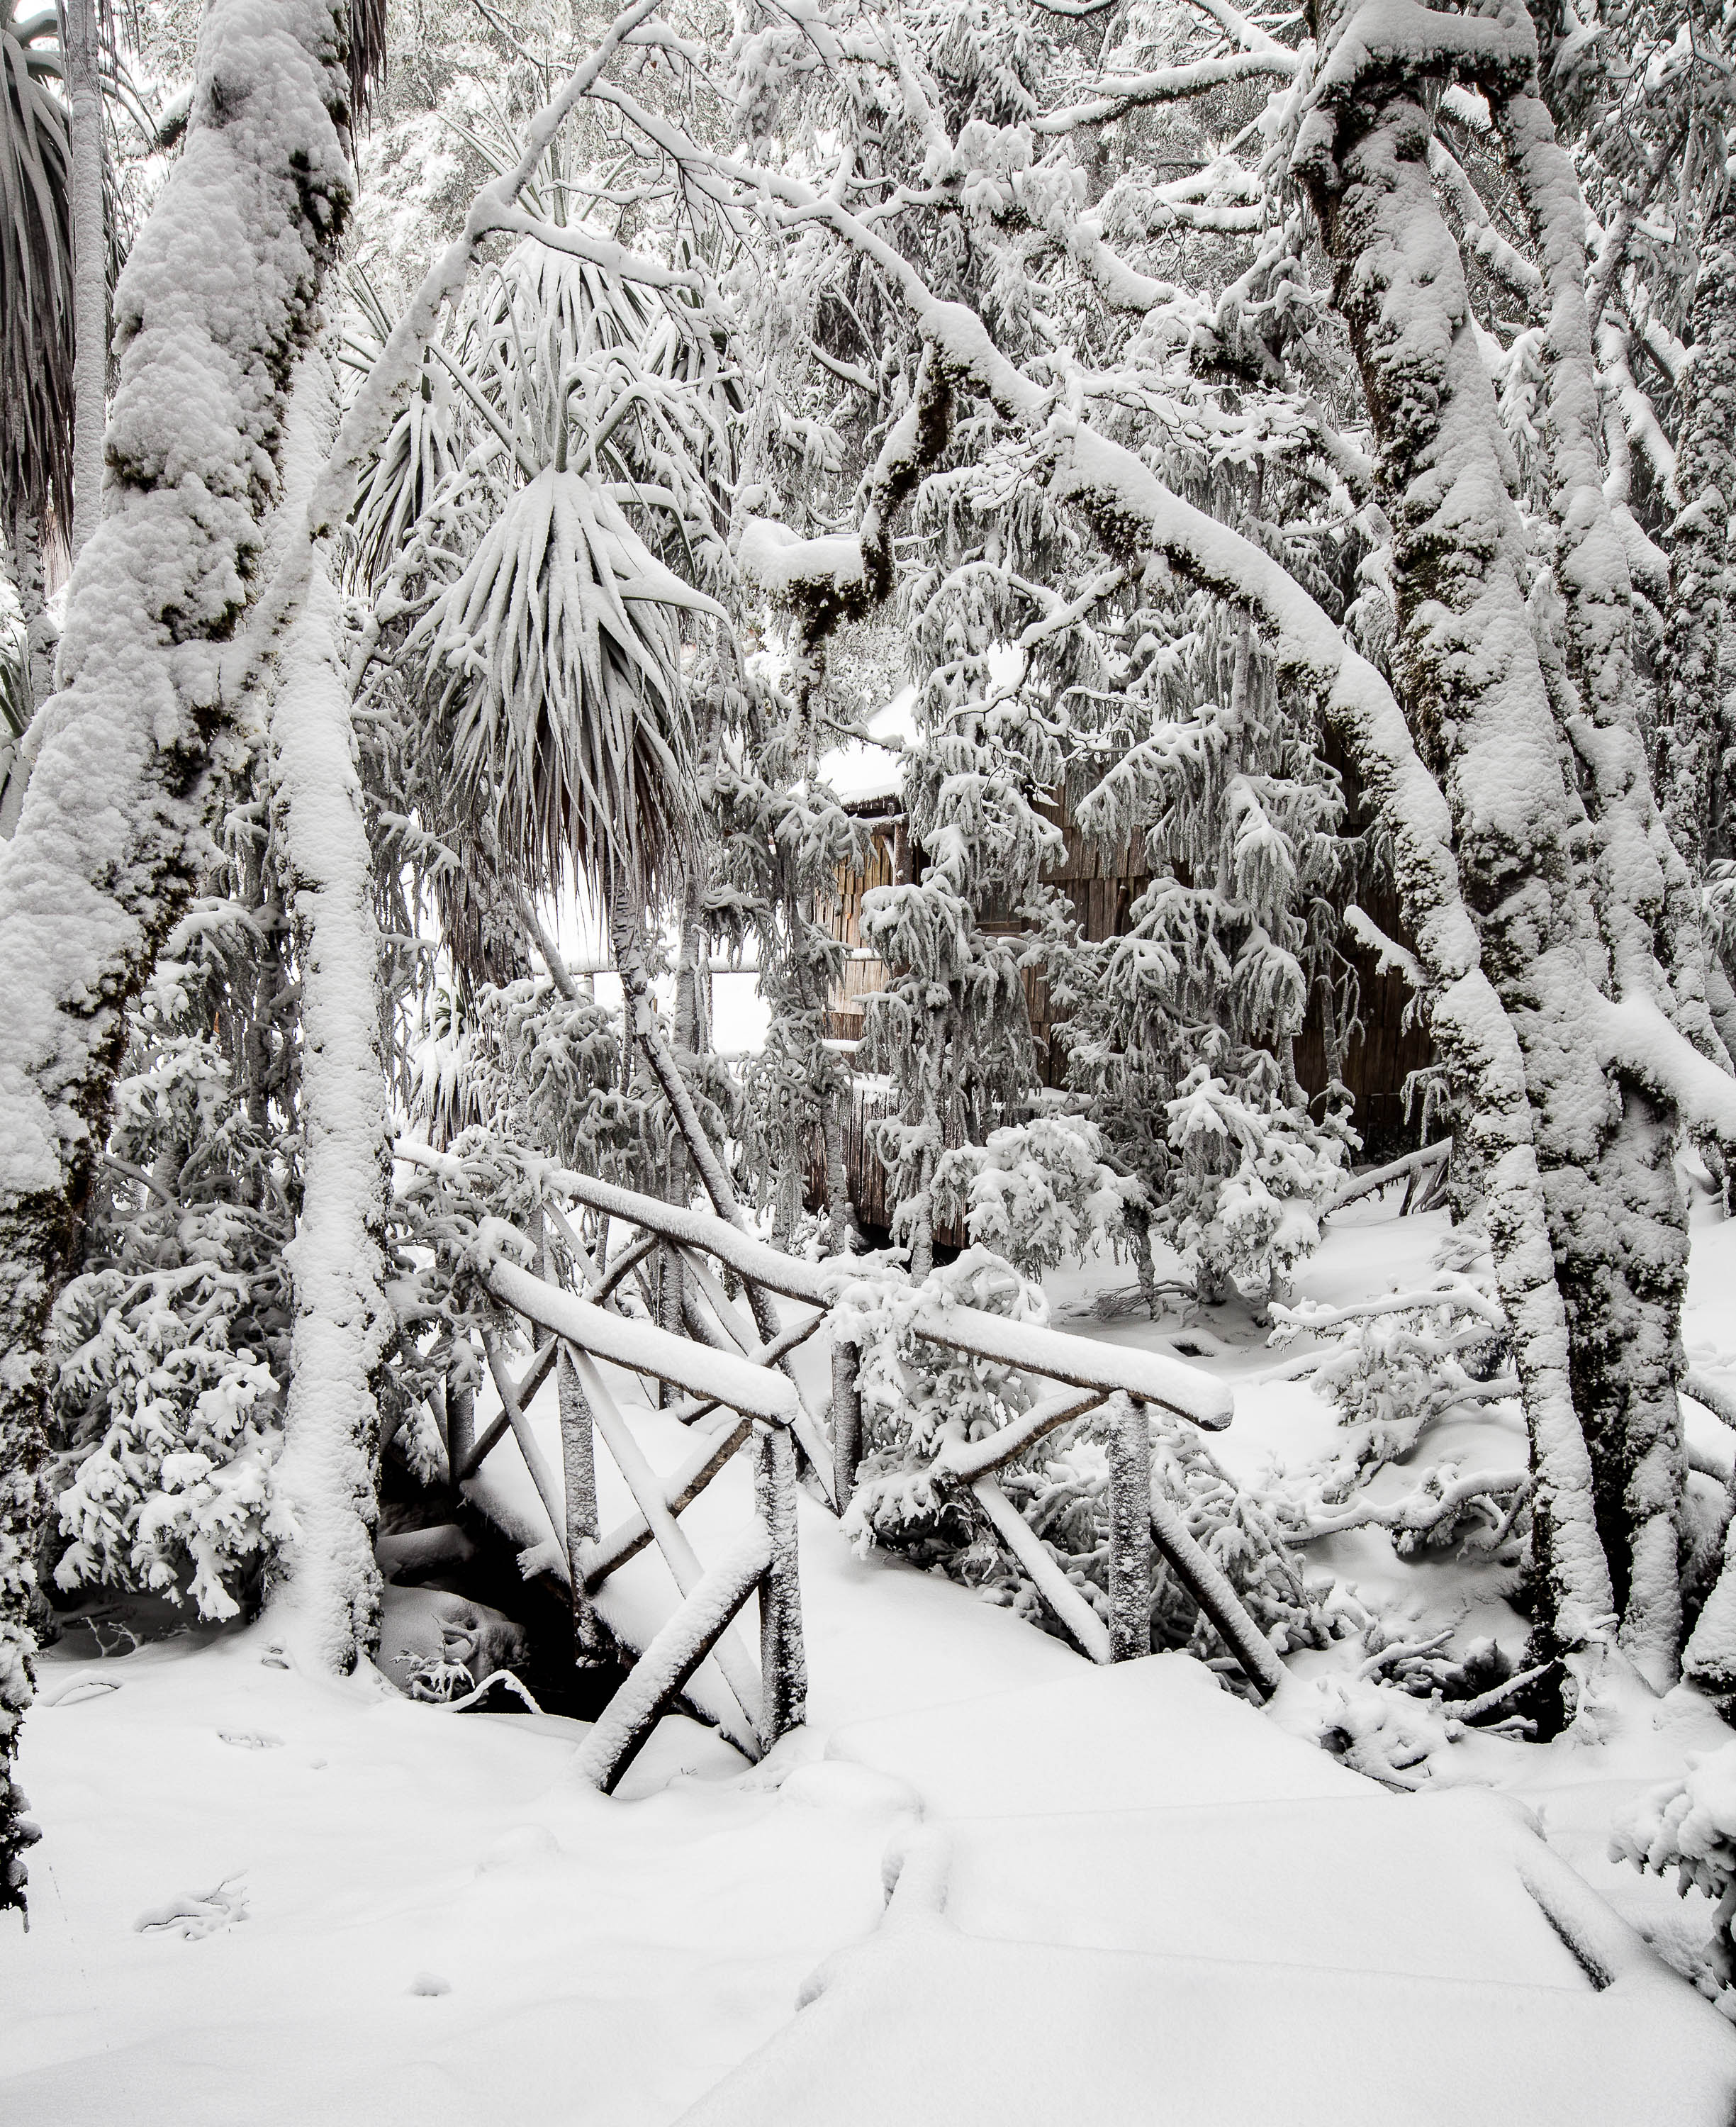 Forest covered with the thick snow, Snow-Covered Bridge, Cradle Mountain, Tasmania